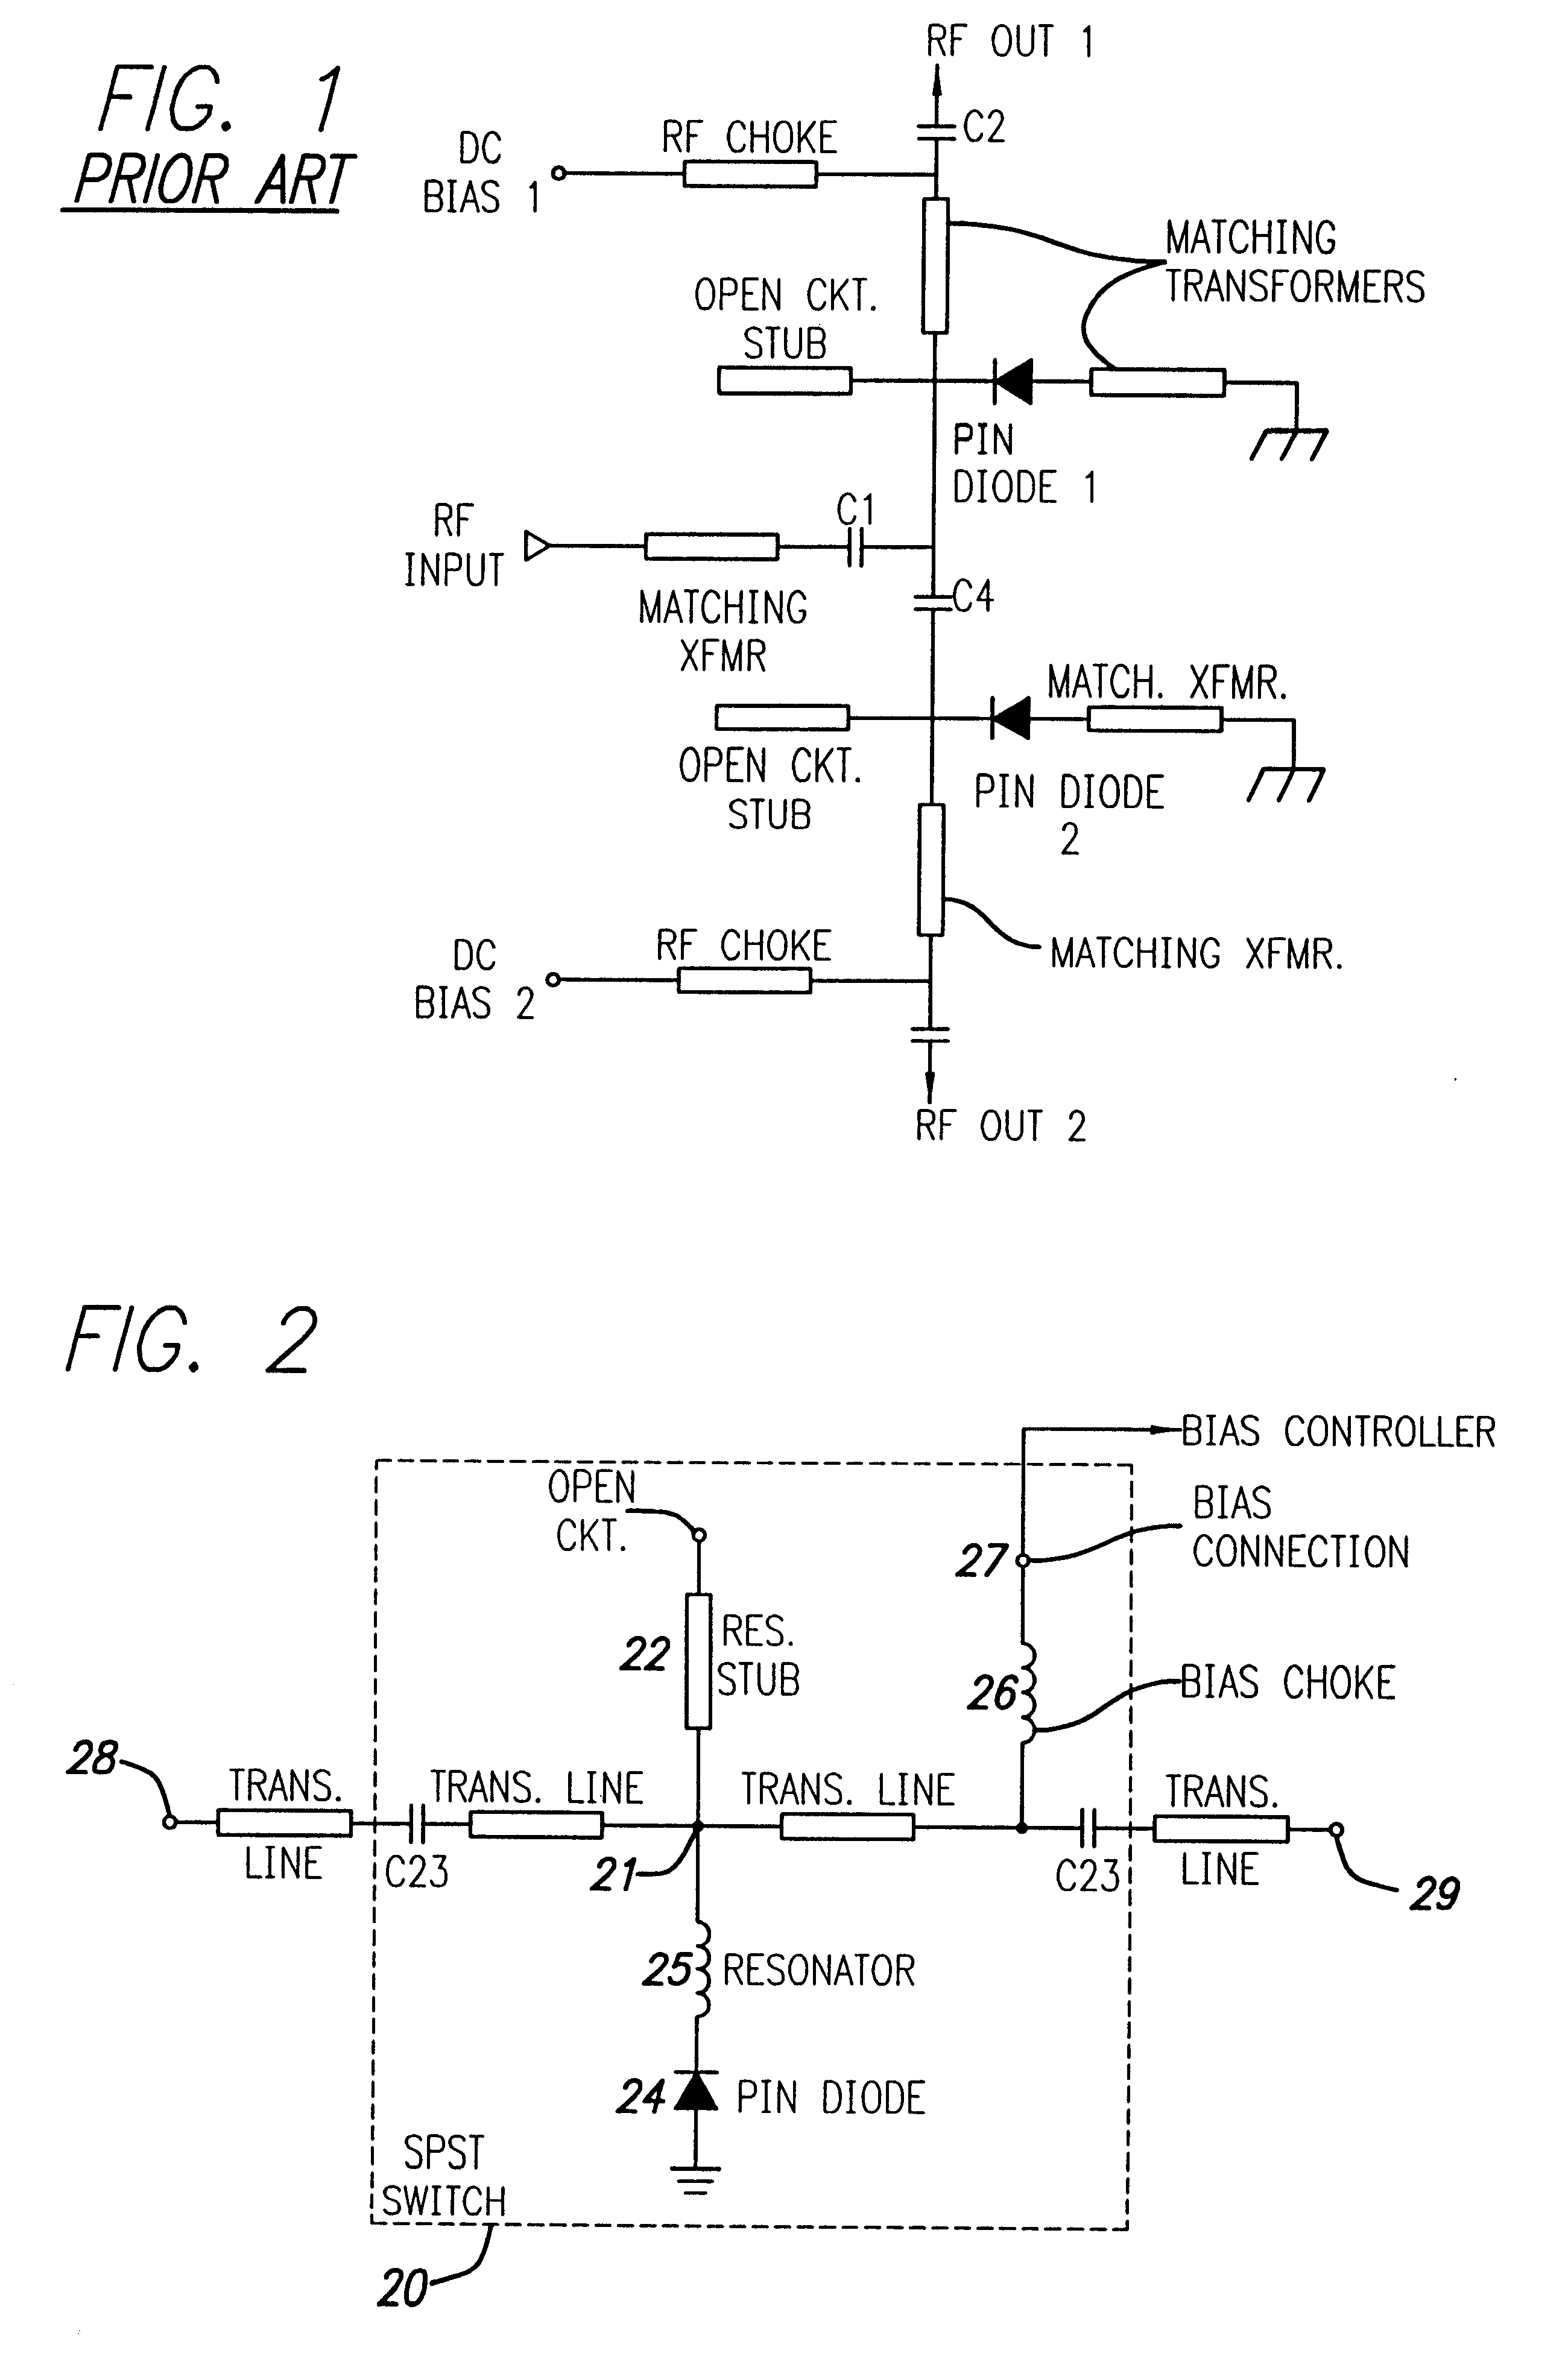 High power pin diode switch